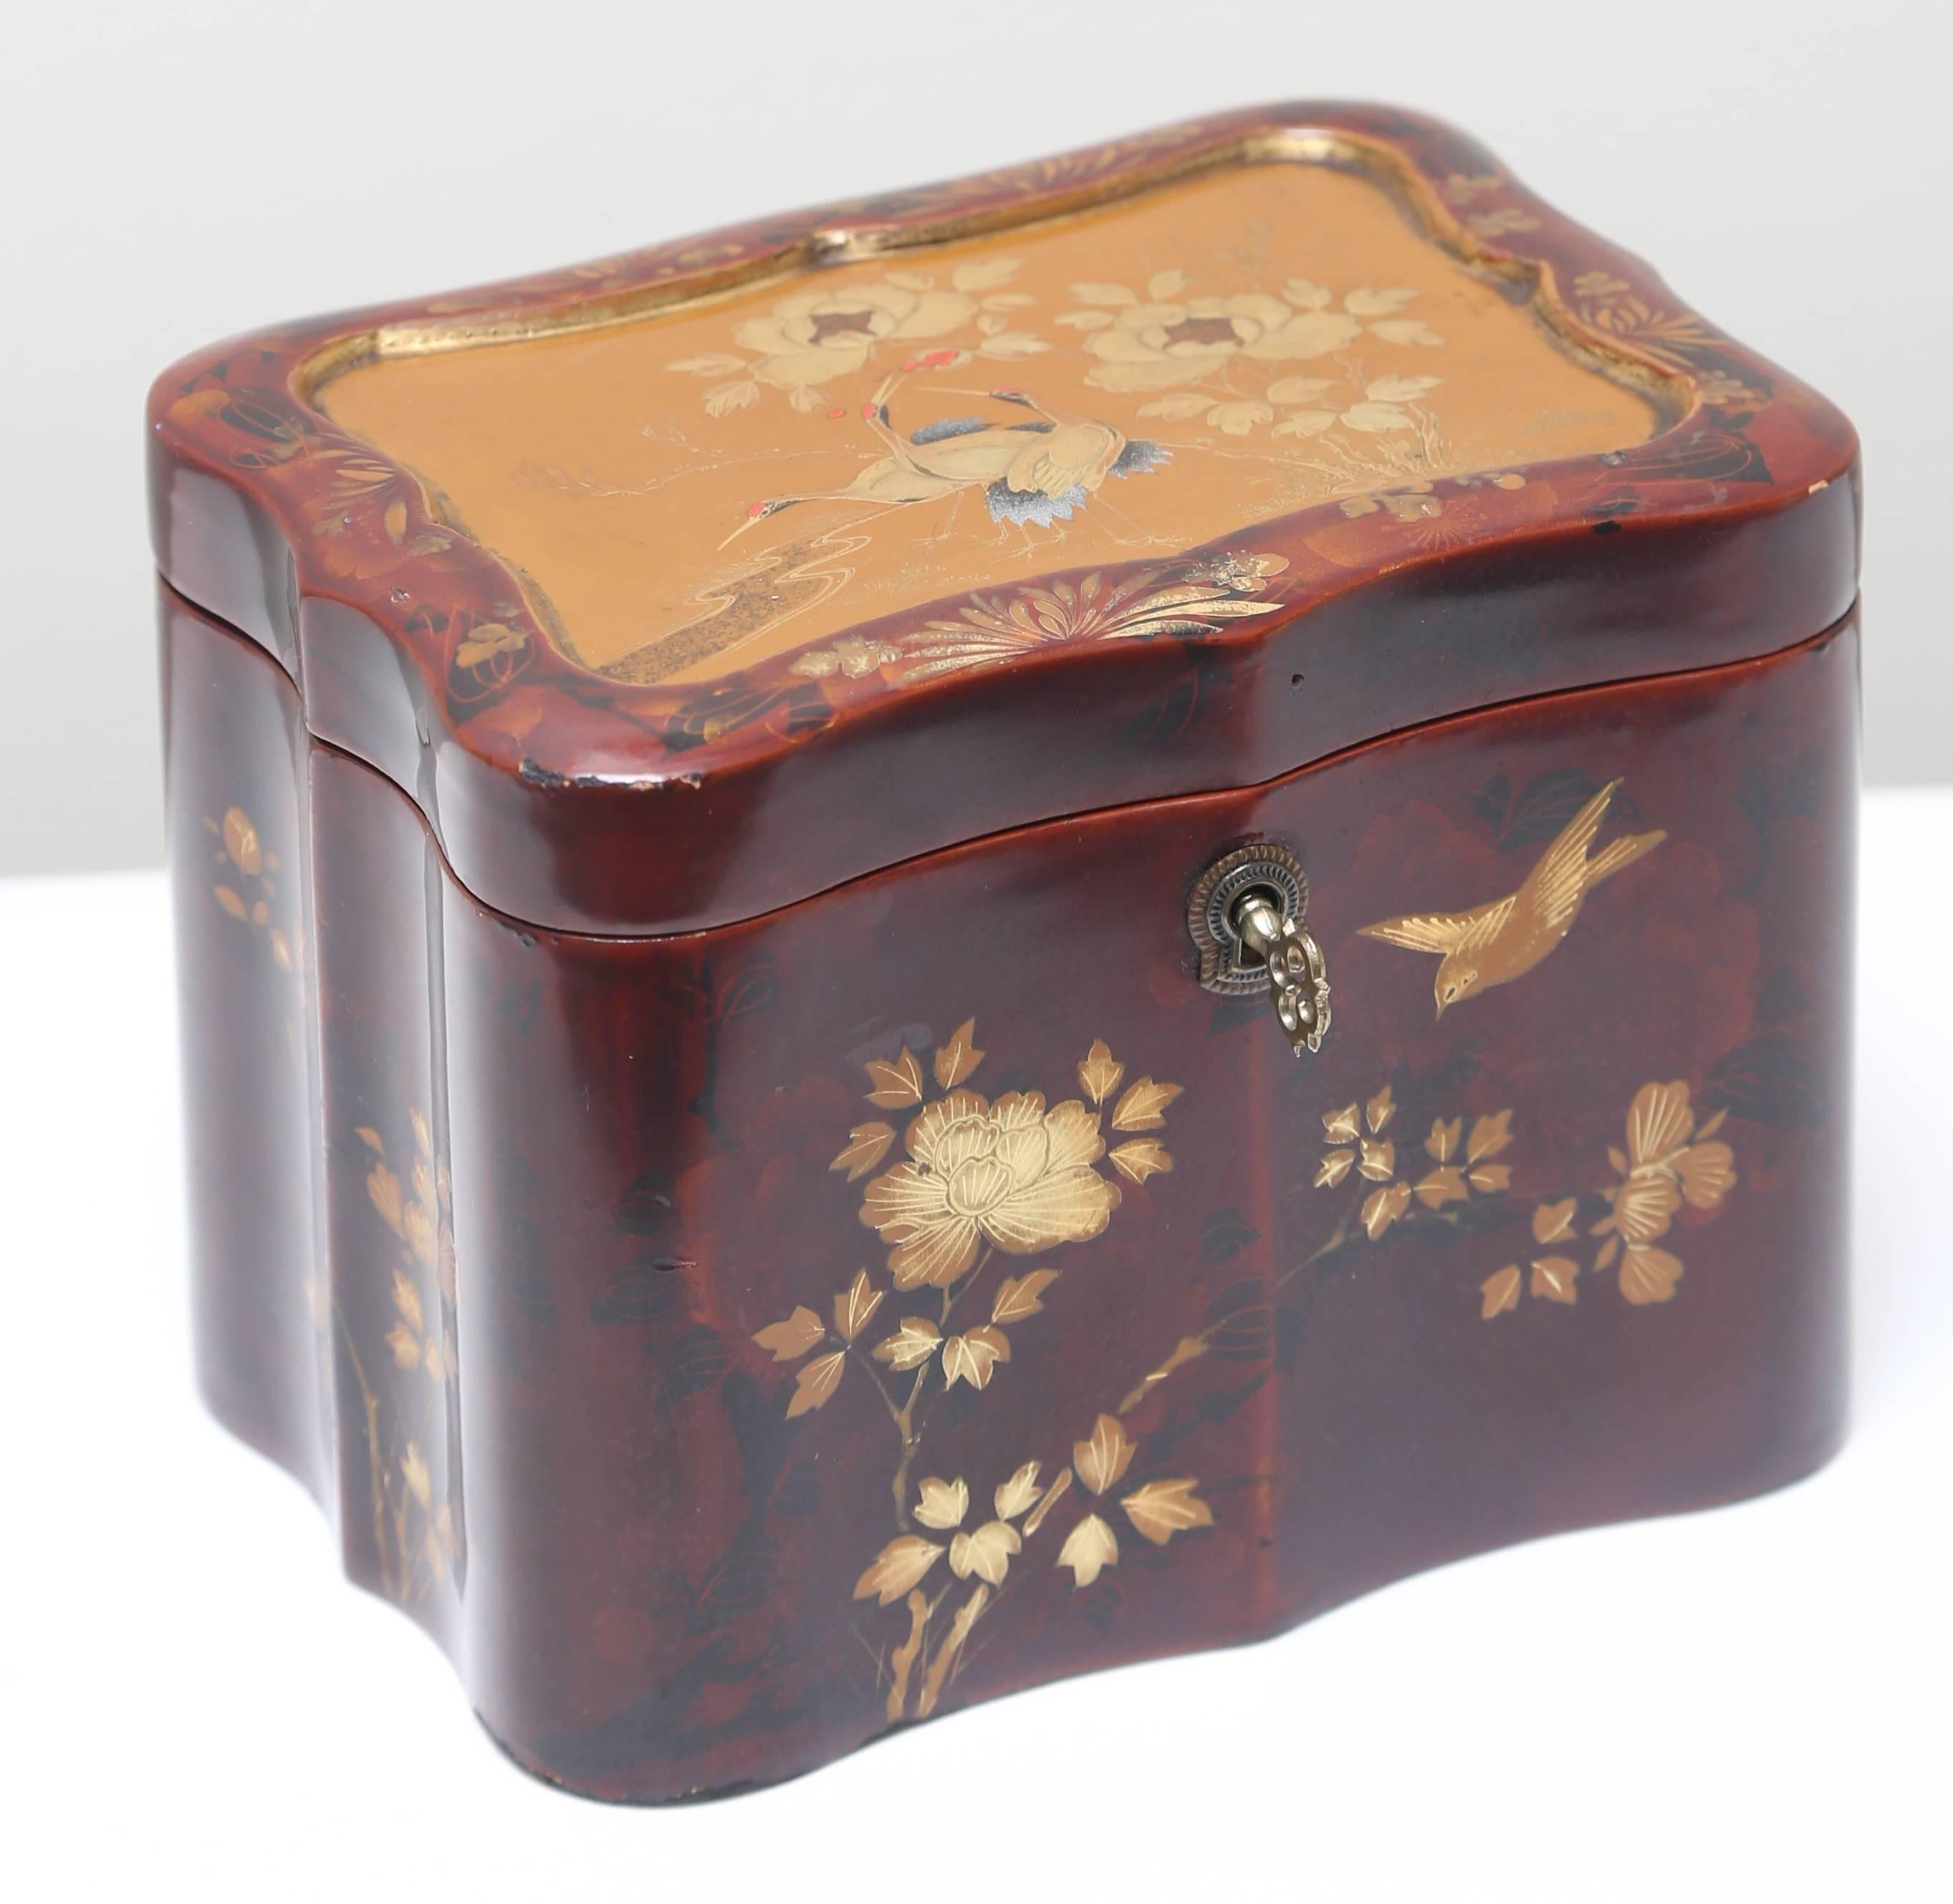 Beautiful red lacquer decorated with birds. Wonderful undulating design. Original key intact.